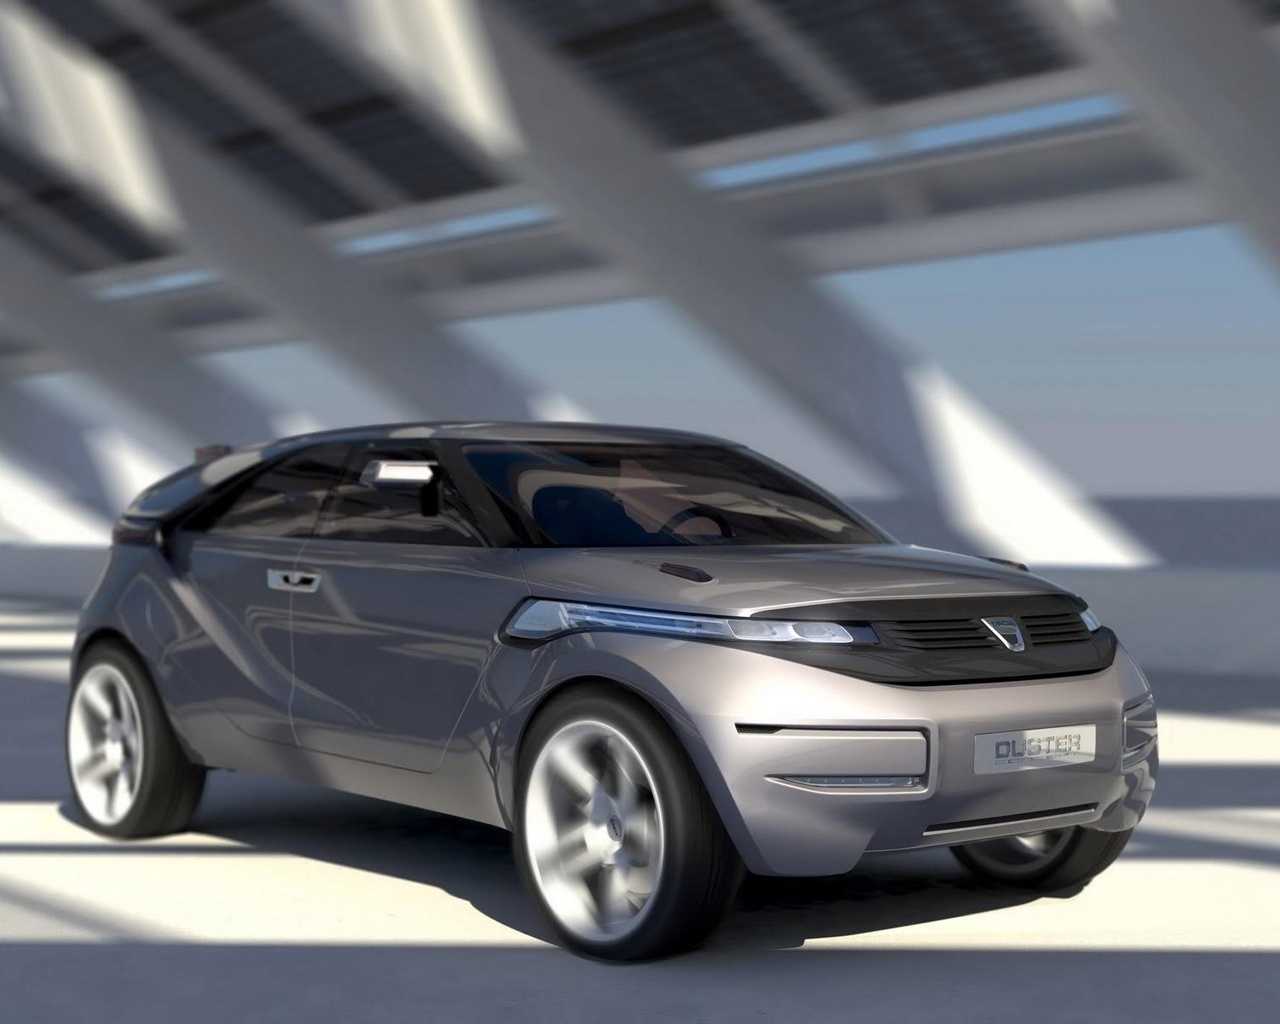 Dacia Duster Crossover Concept Running for 1280 x 1024 resolution